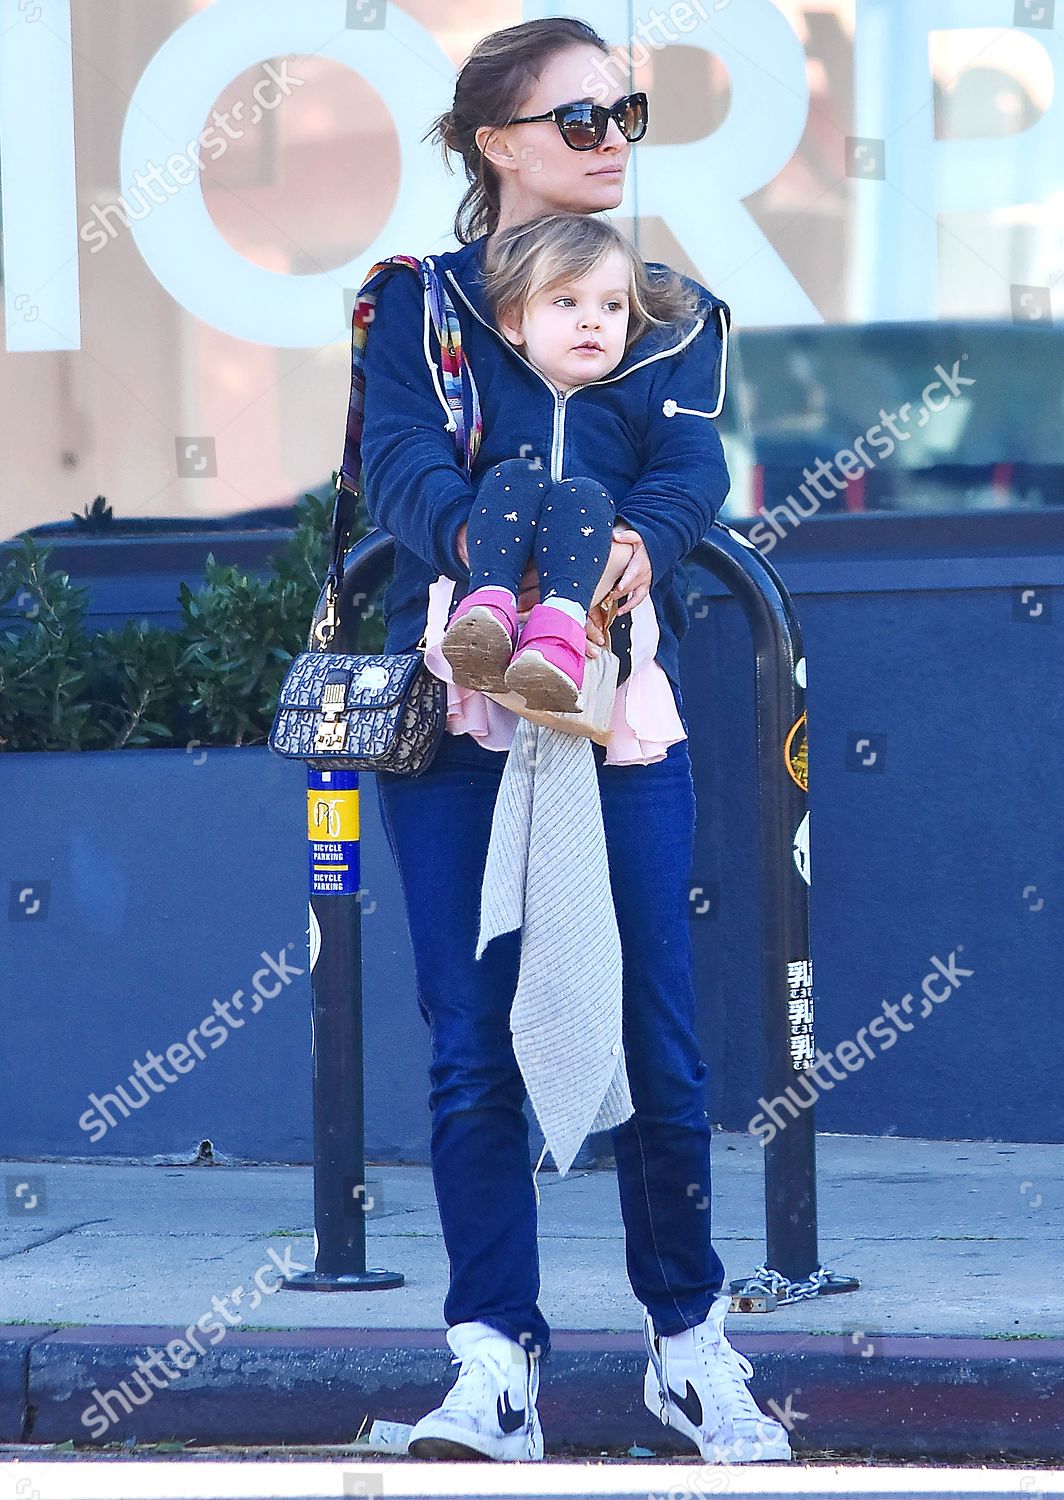 Natalie Portman Amalia Millepied Editorial Stock Photo Stock Image Shutterstock Natalie portman and husband benjamin millepied have welcomed their daughter into the worldcredit: https www shutterstock com editorial image editorial natalie portman out and about los angeles usa 04 feb 2020 10548923f